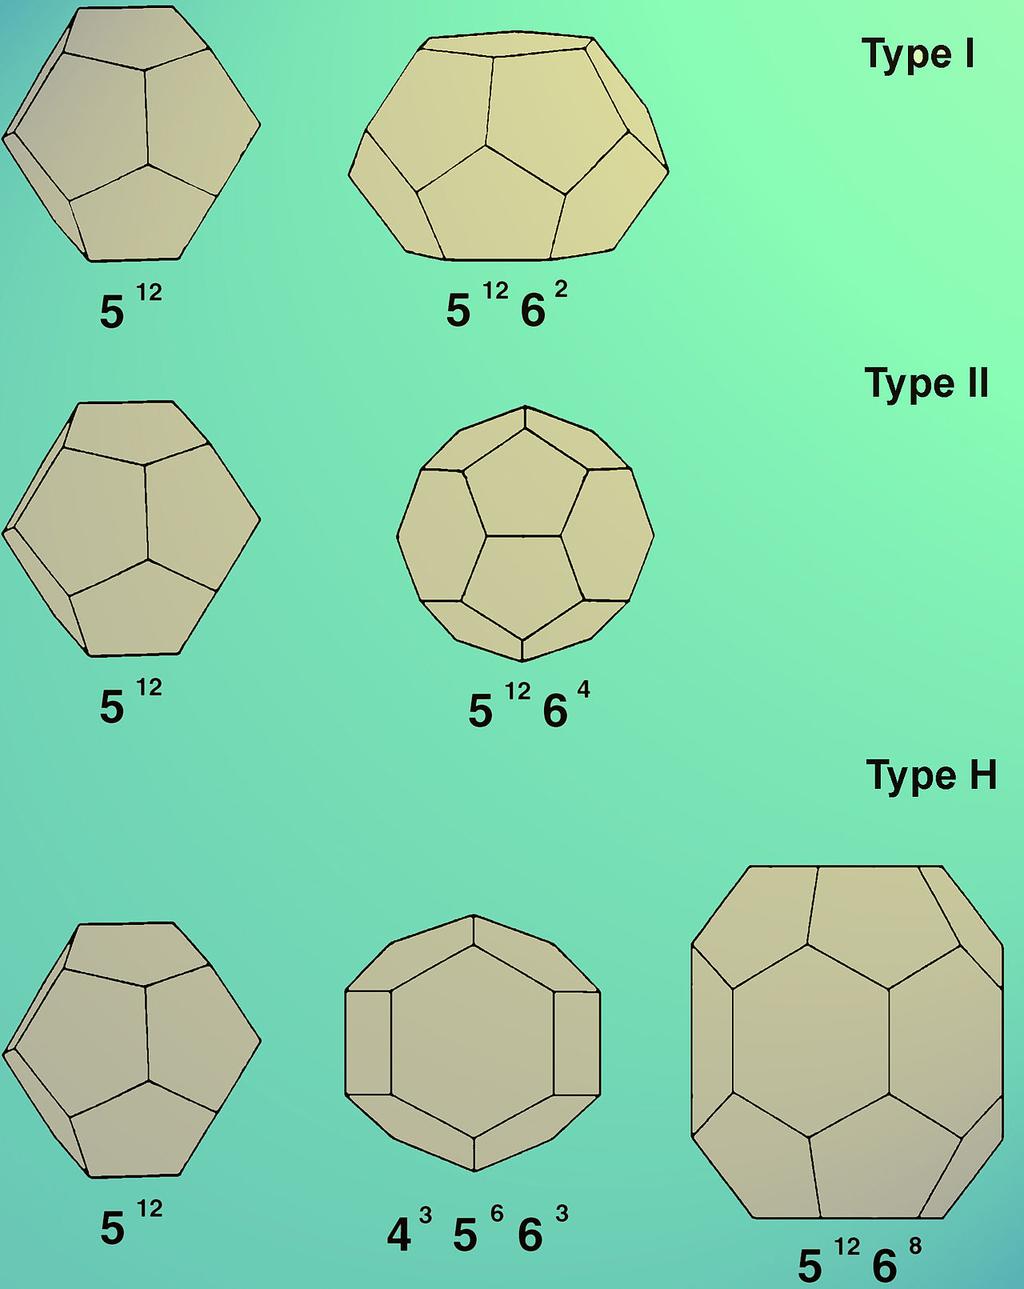 Solvation of nonpolar molecules Different types of clathrates found Gas hydrates usually form two crystallographic cubic structures (types I and II) and seldom, a third hexagonal structure (type H):